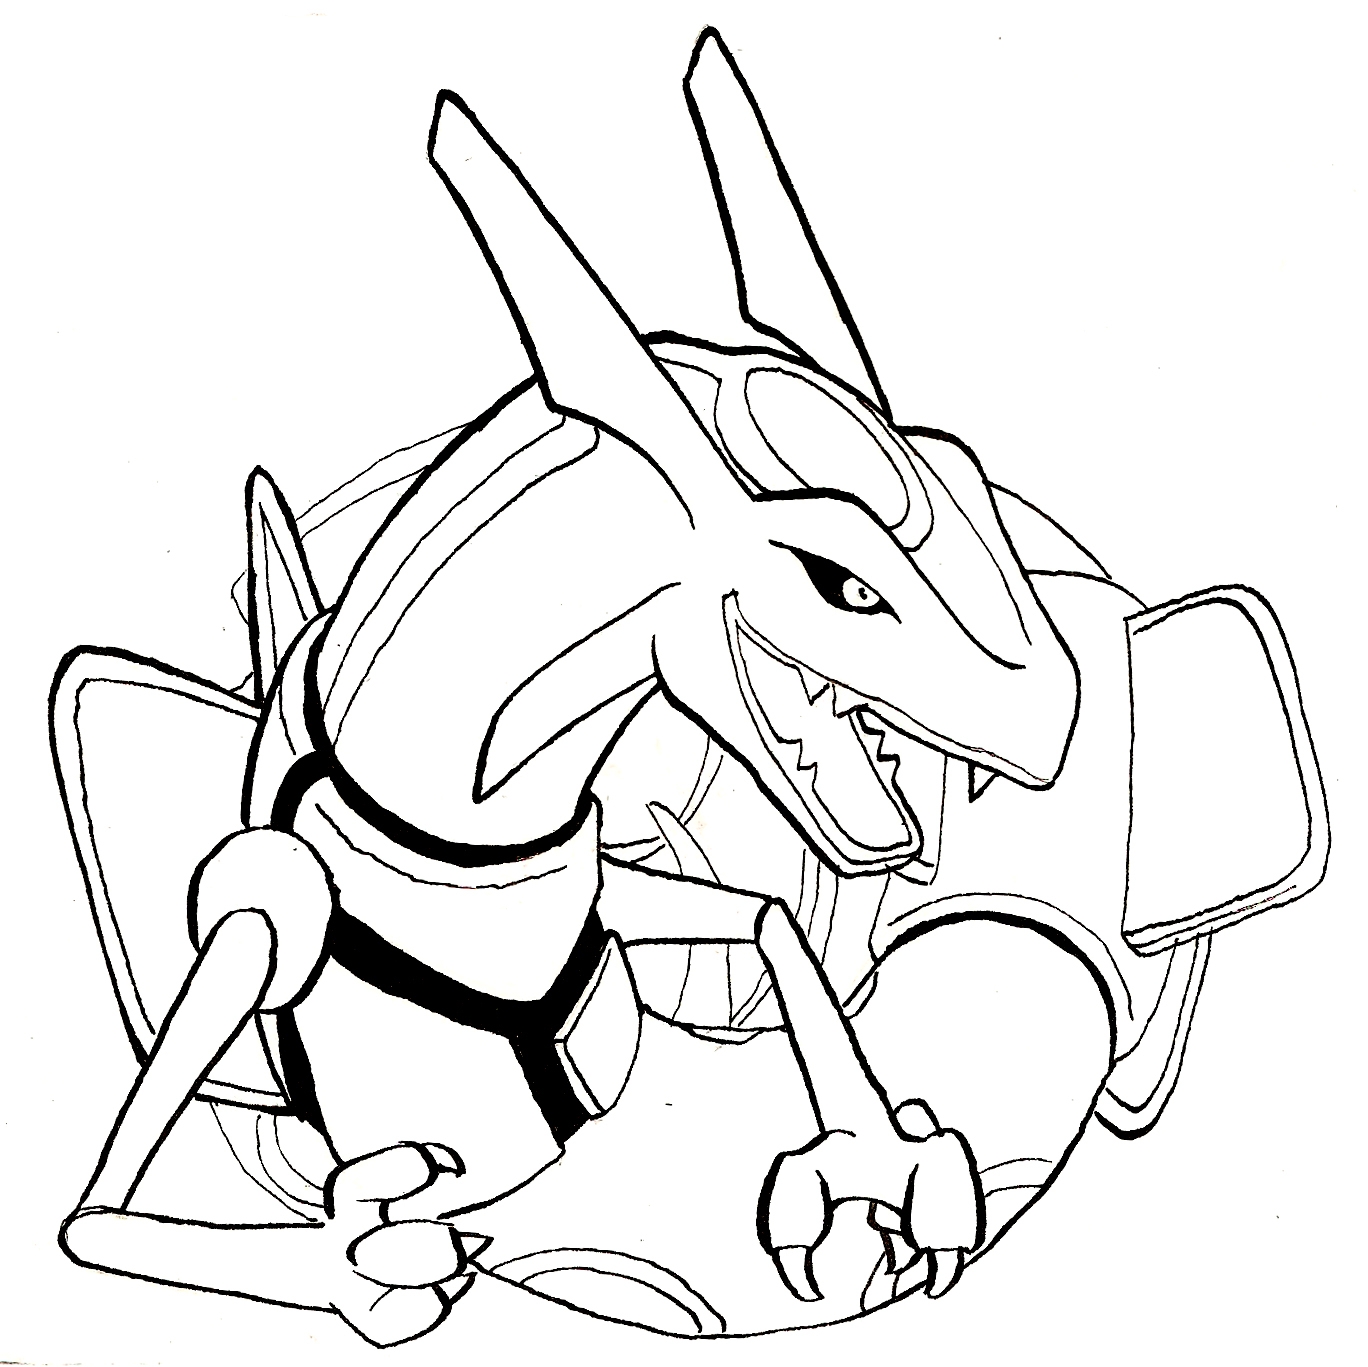 Pokemon Rayquaza Coloring Pages at GetColorings.com | Free printable